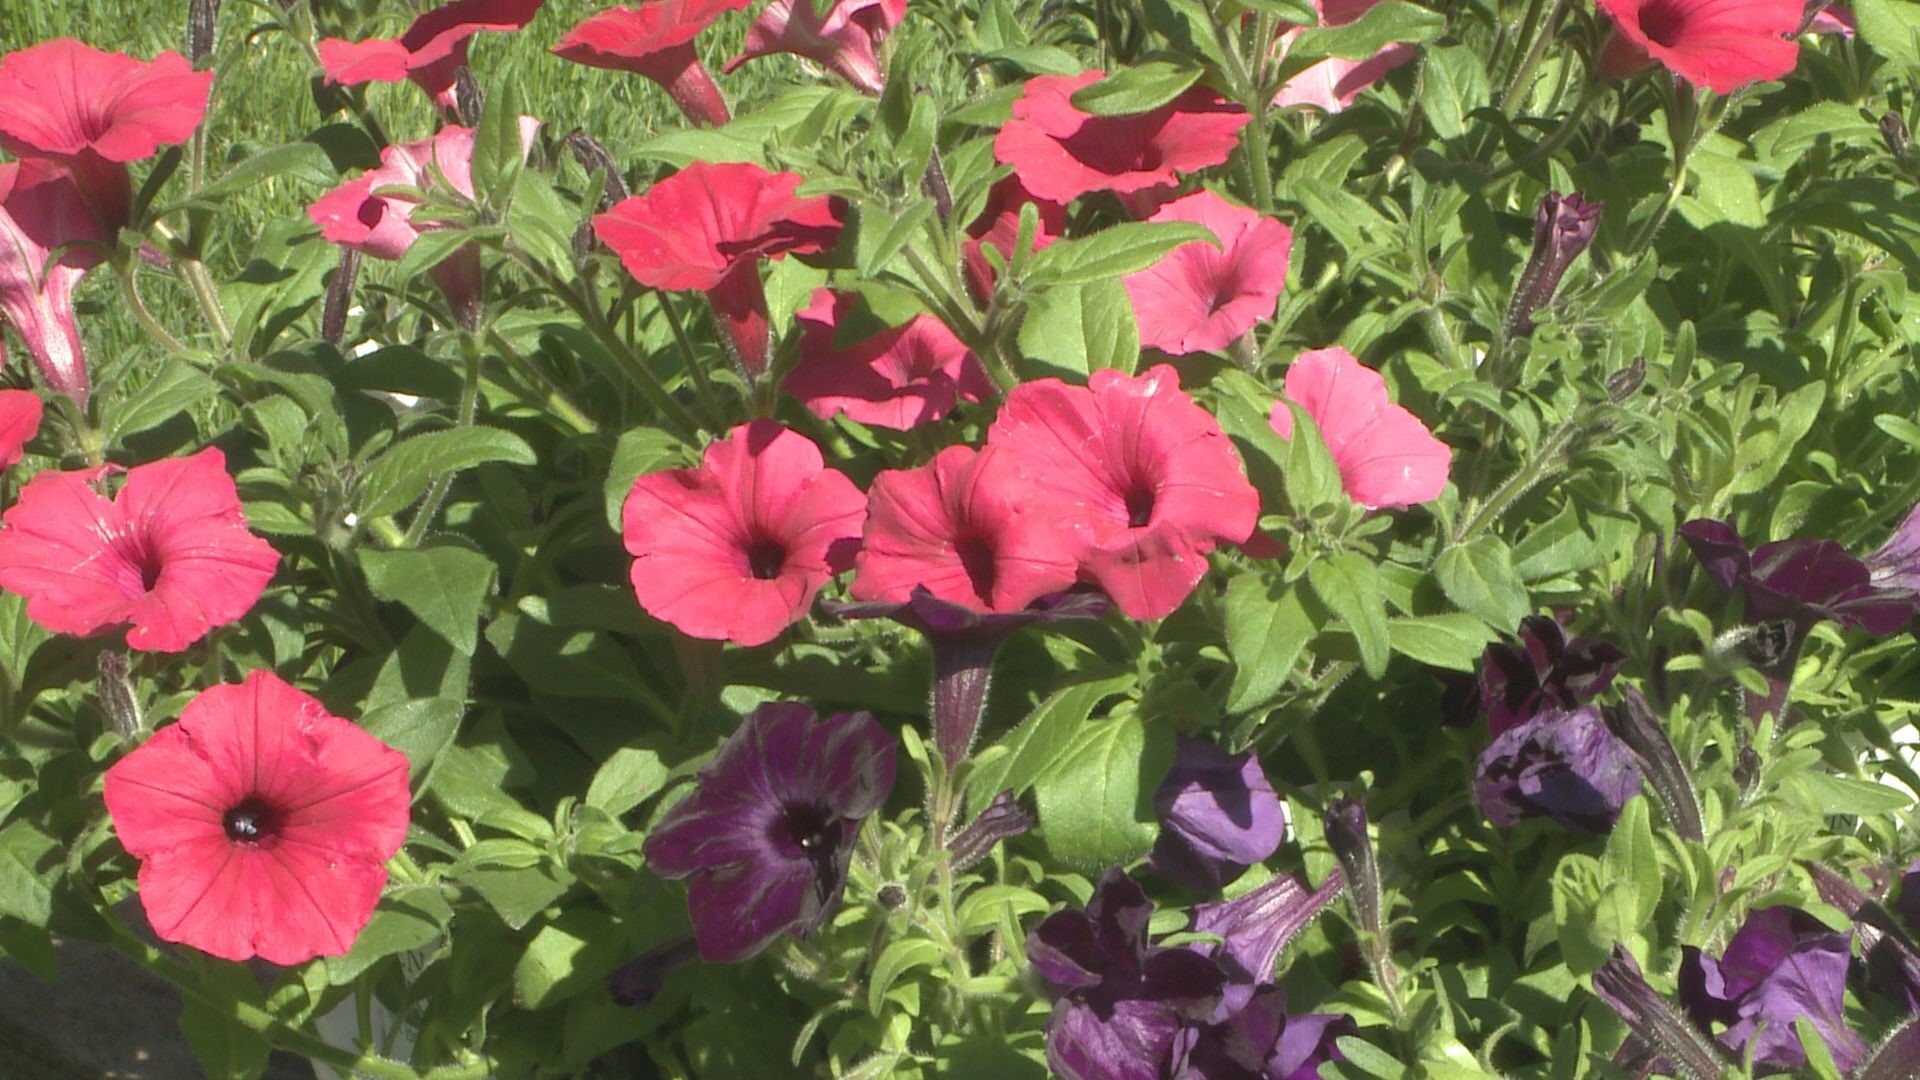 Some varieties of petunias require very little care. Here are some tips on making a great petunia display.